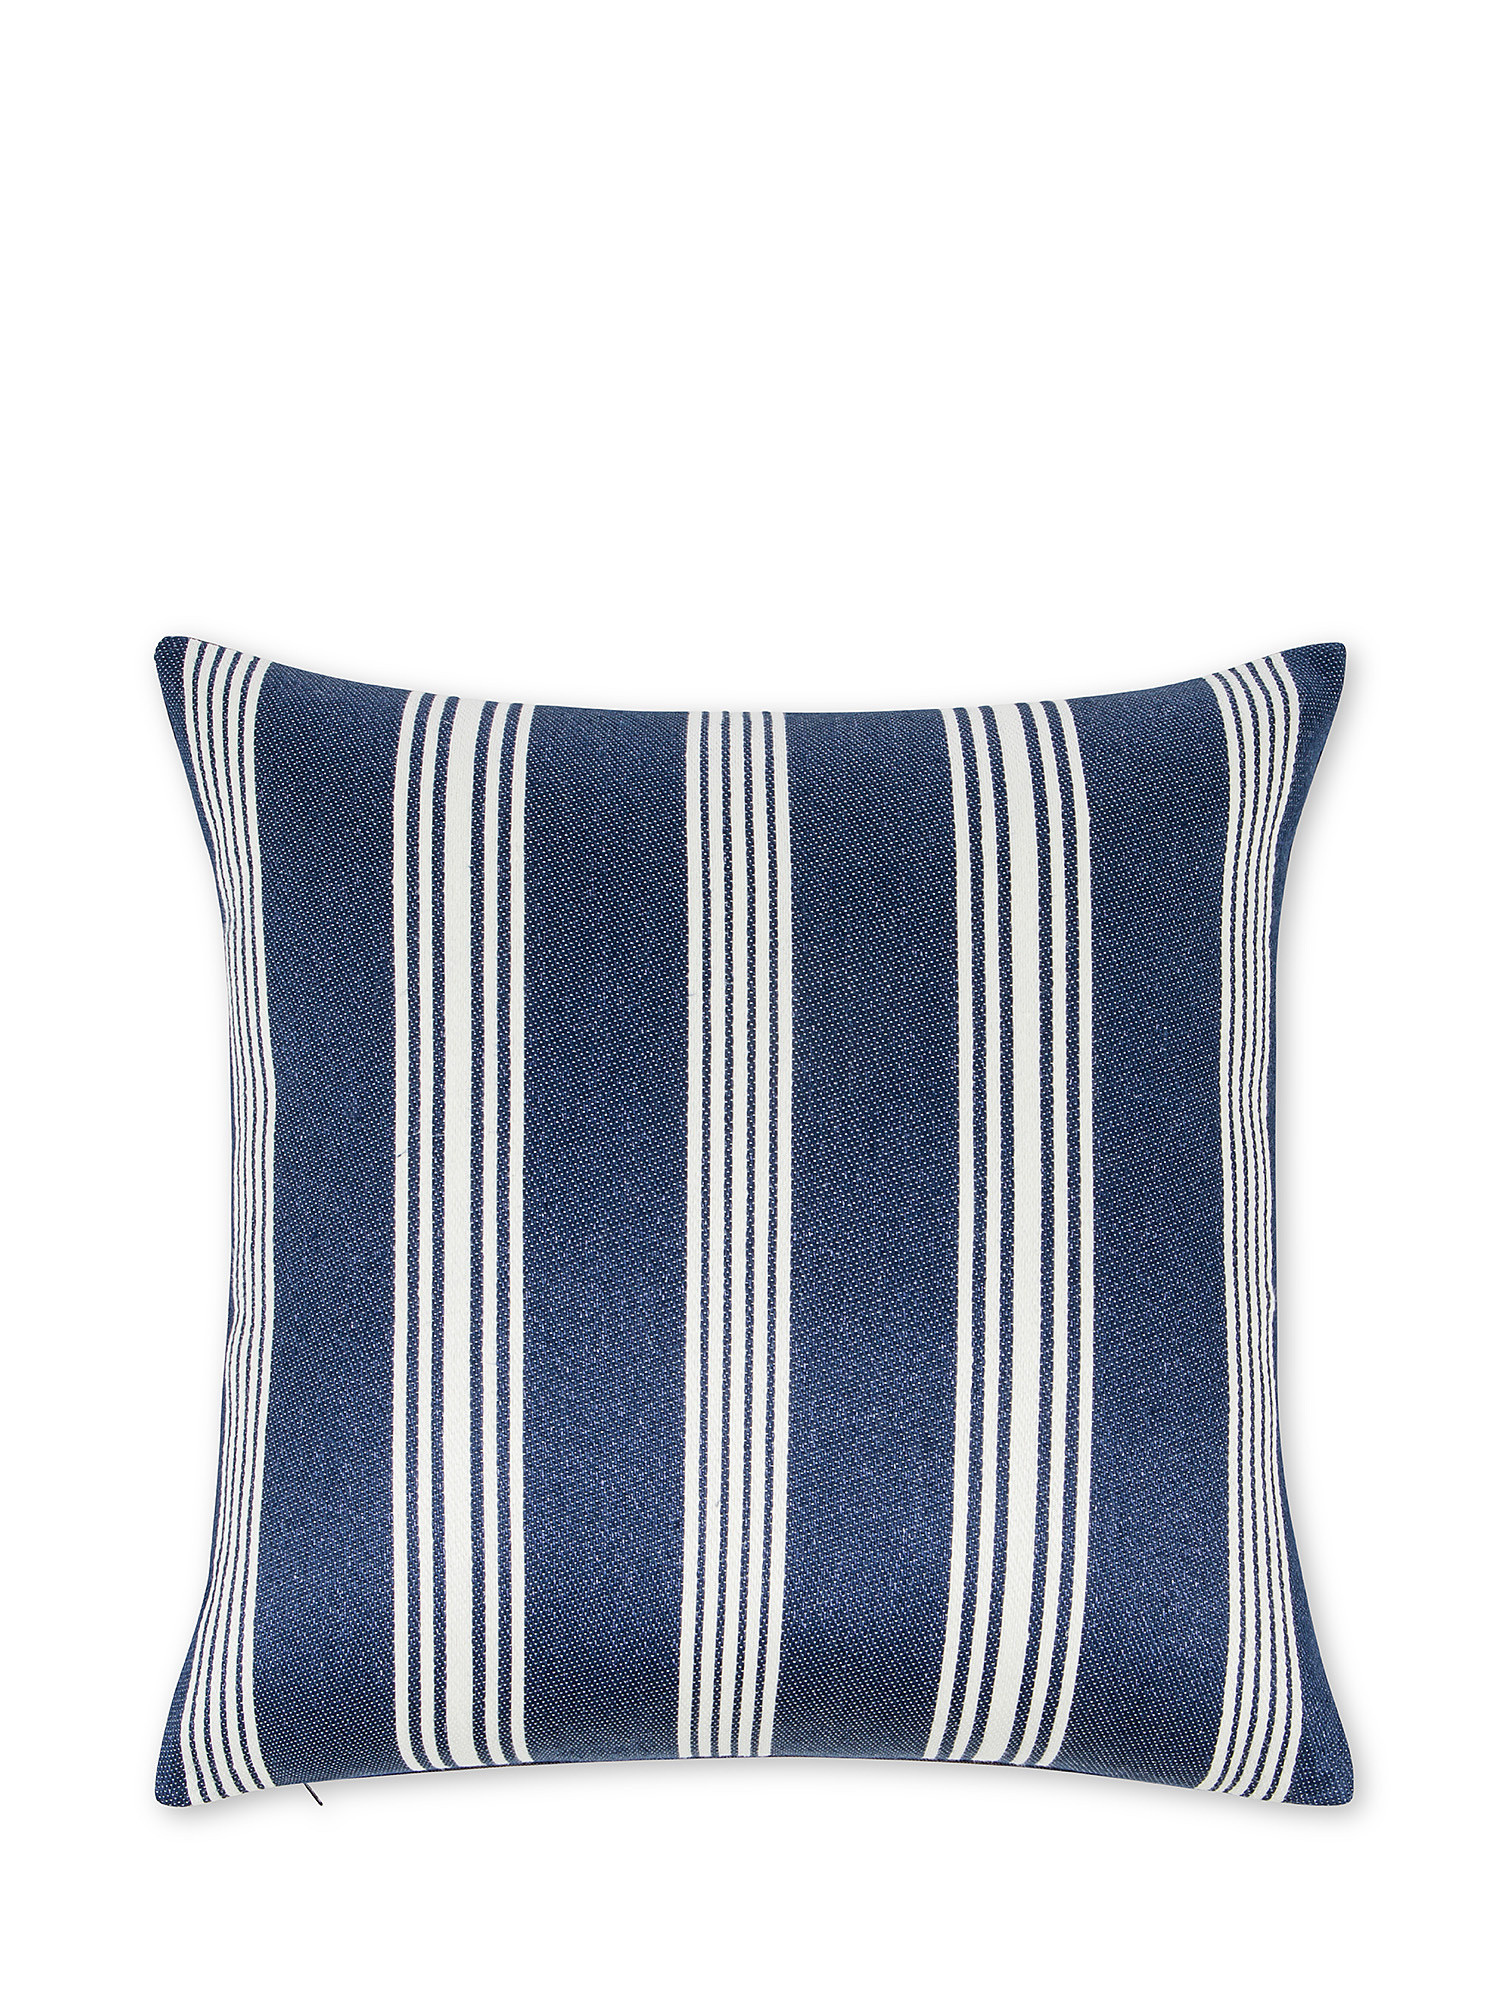 43x43 cm cushion in cotton and linen, Blue, large image number 0